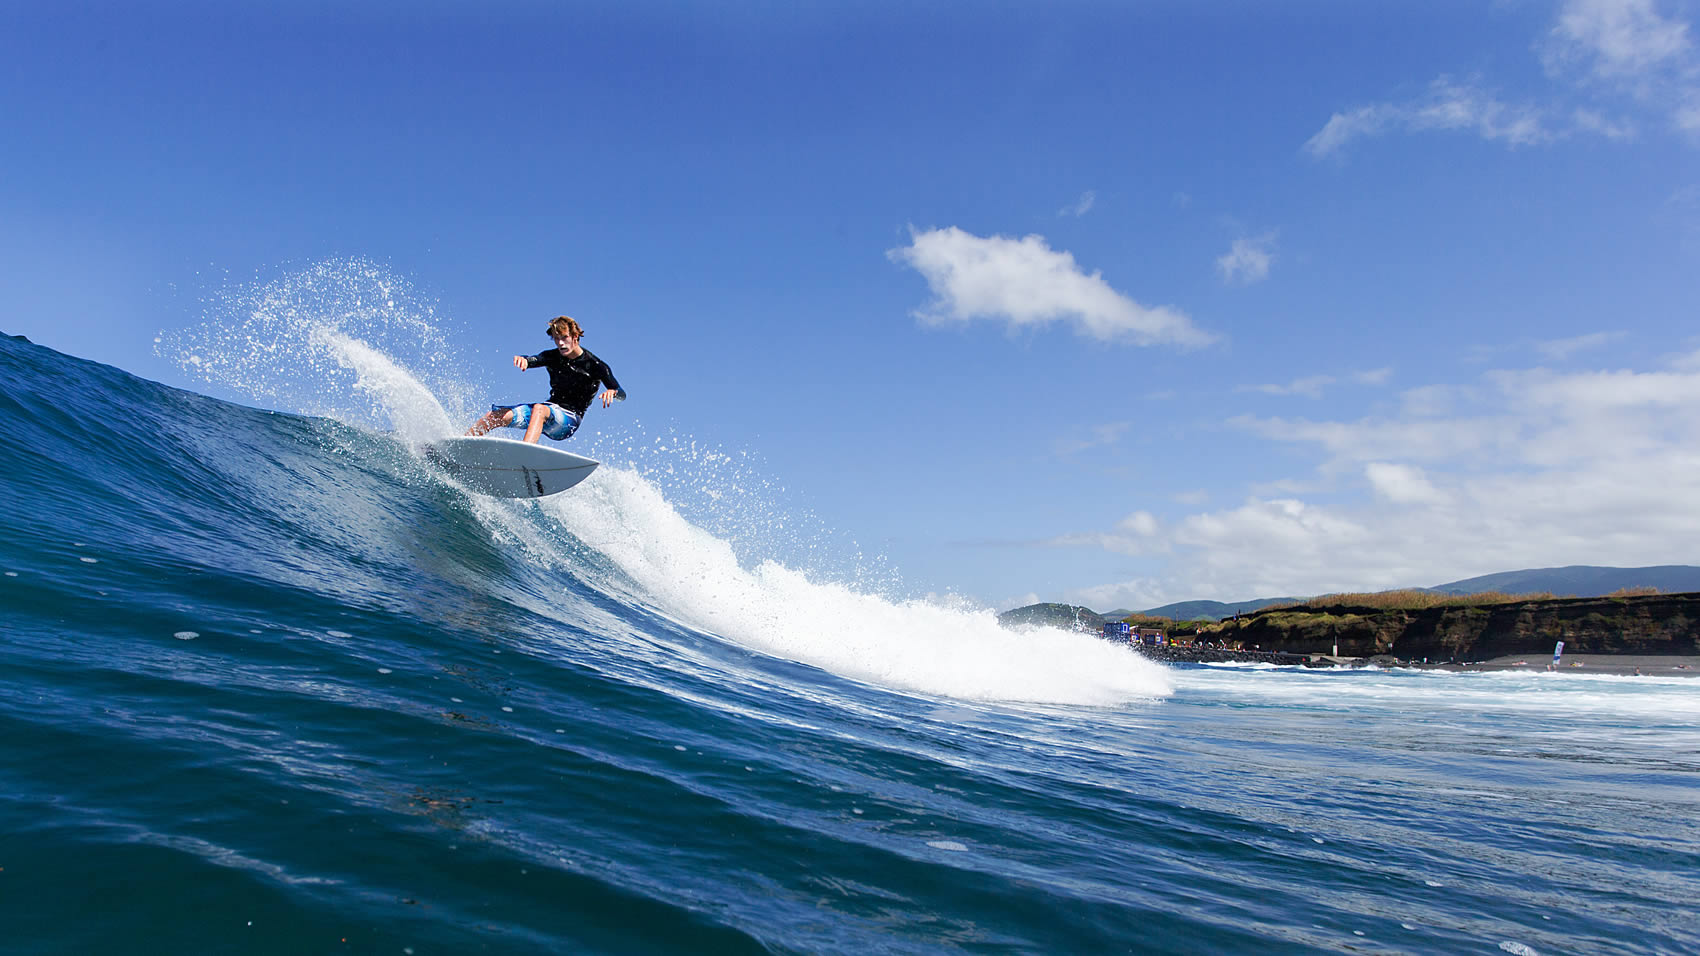 Visit Azores  Surf Holidays in Azores - Surfing Vacations in Portugal